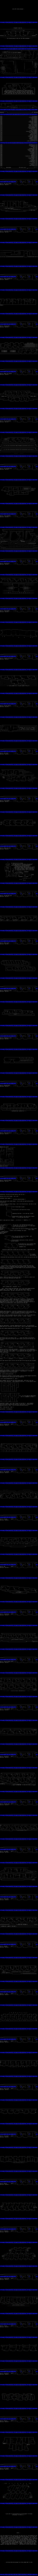 oldschool ascii colly number 10 by jack phlash